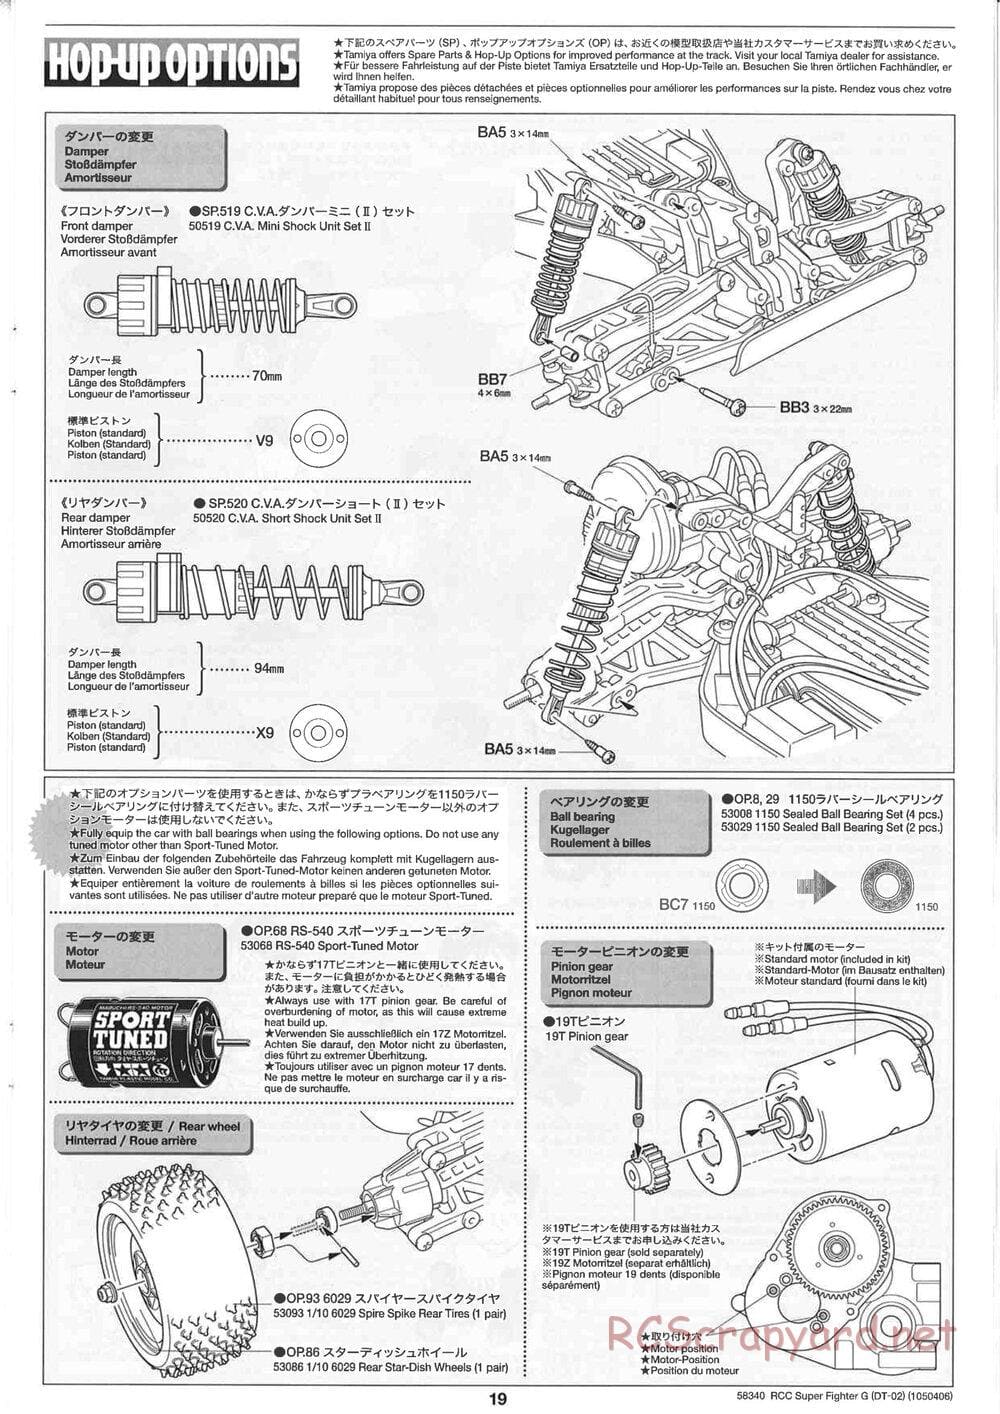 Tamiya - Super Fighter G Chassis - Manual - Page 19